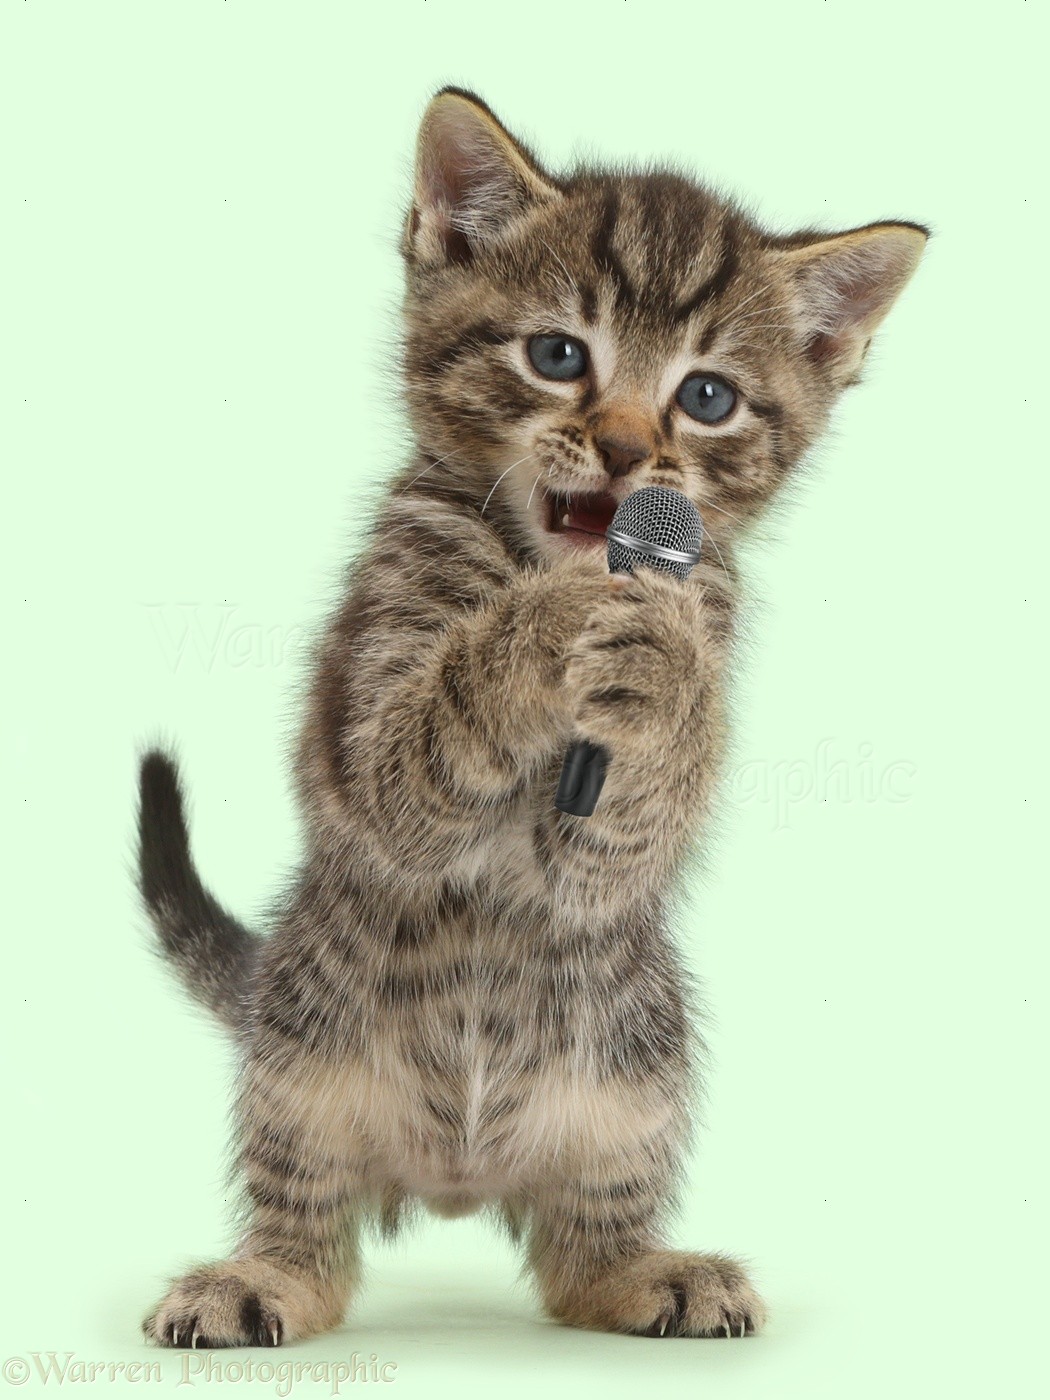 Small tabby kitten, holding and singing into microphone photo WP42168